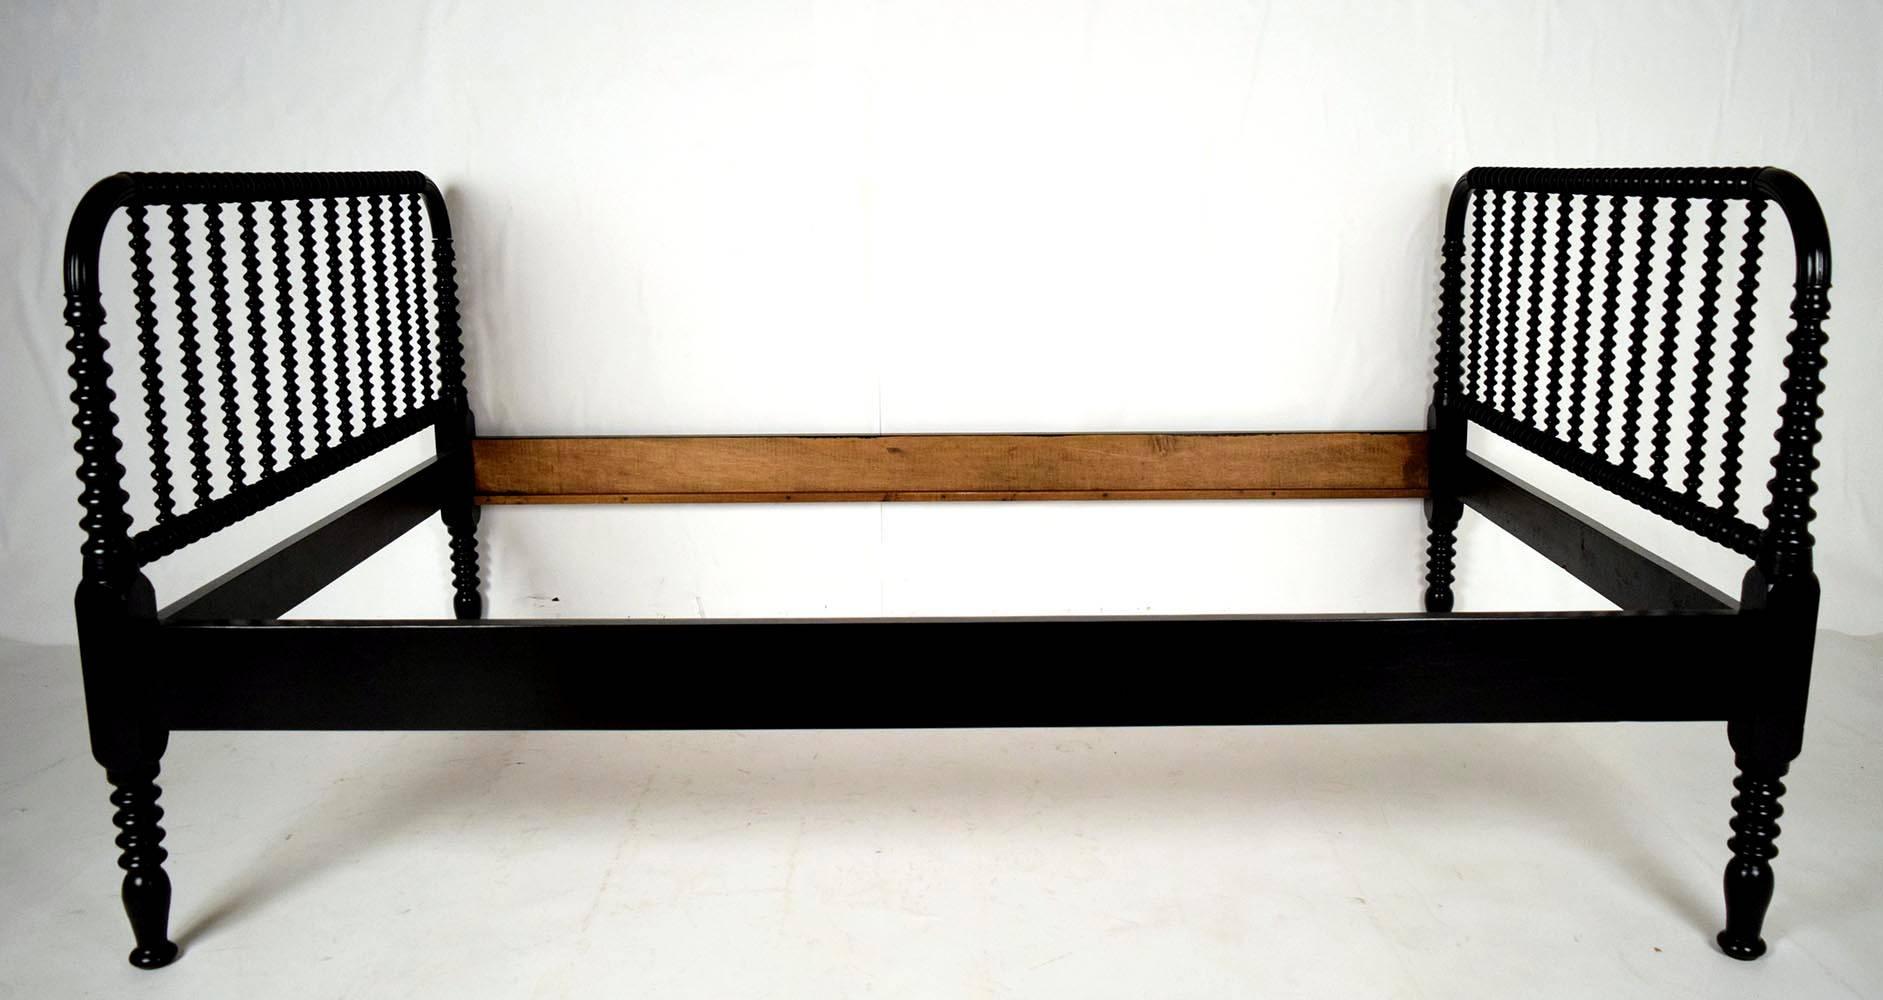 This is a beautiful 1890s spool daybed frame. Solid mahogany wood, newly painted in a rich black color with a deep lacquered finish. Amazingly carved headboards and legs. Frame is solid and sturdy ready to be used.

Inside dimensions: 50